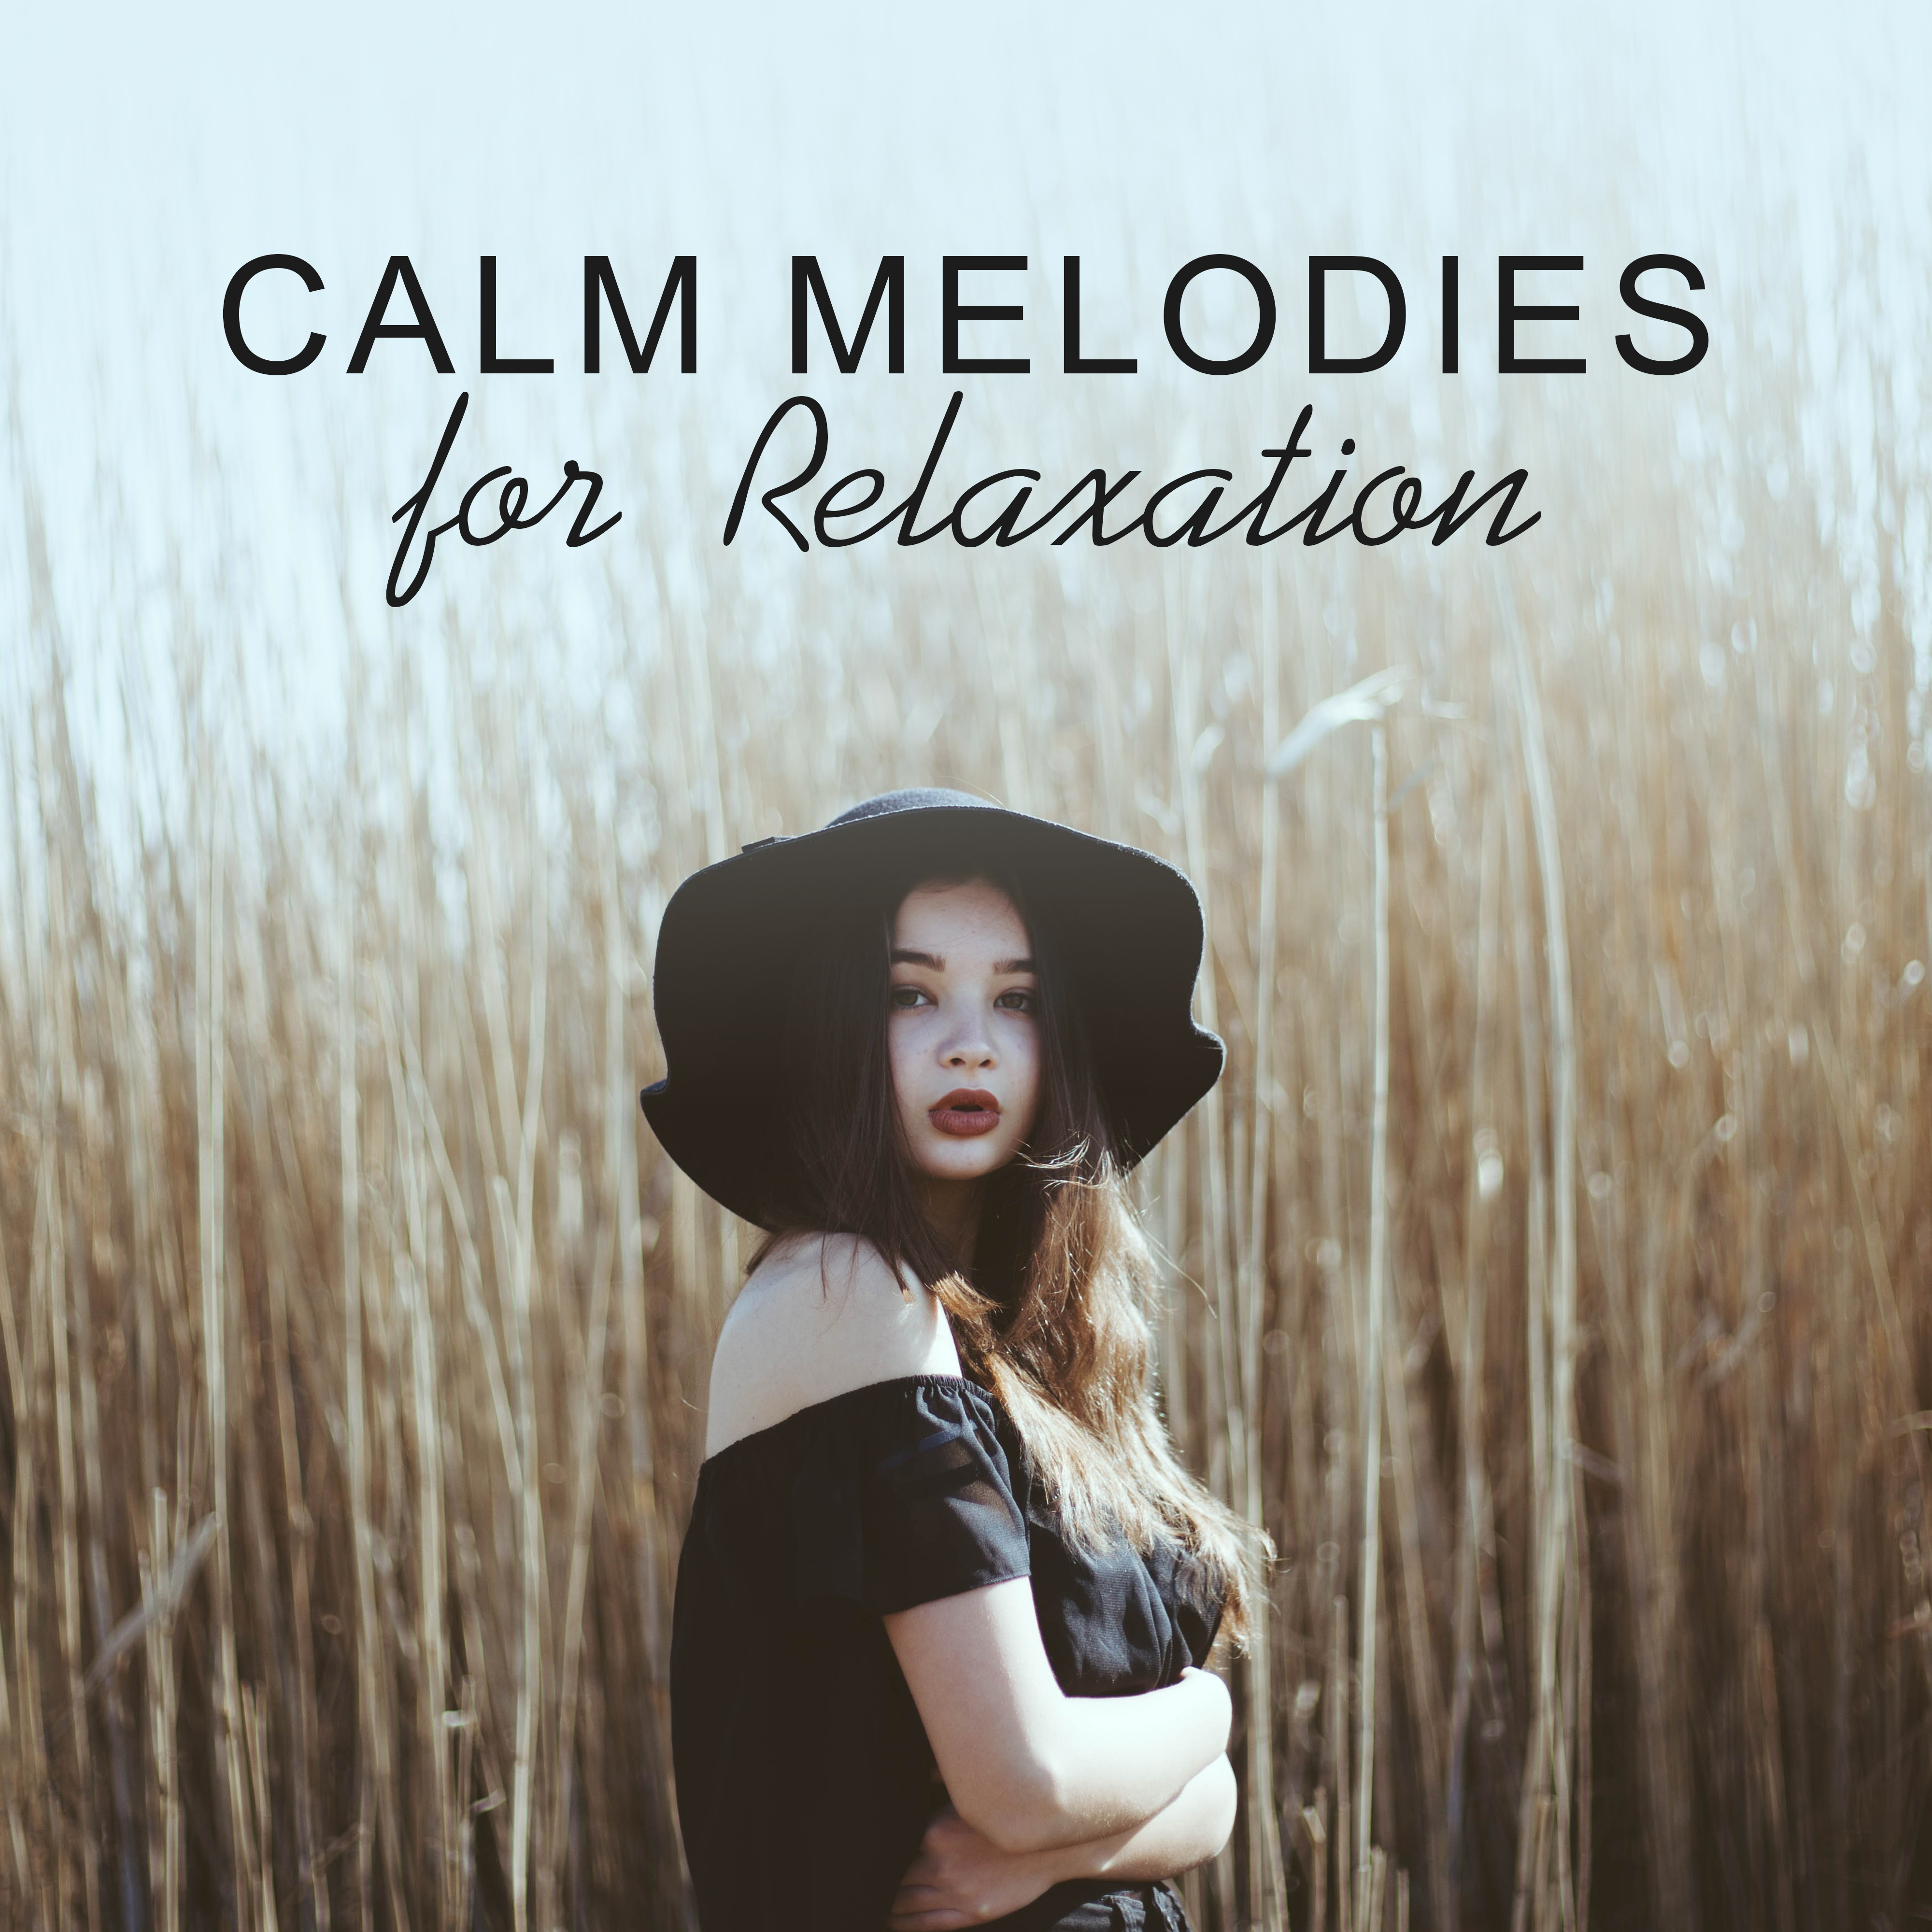 Calm Melodies for Relaxation